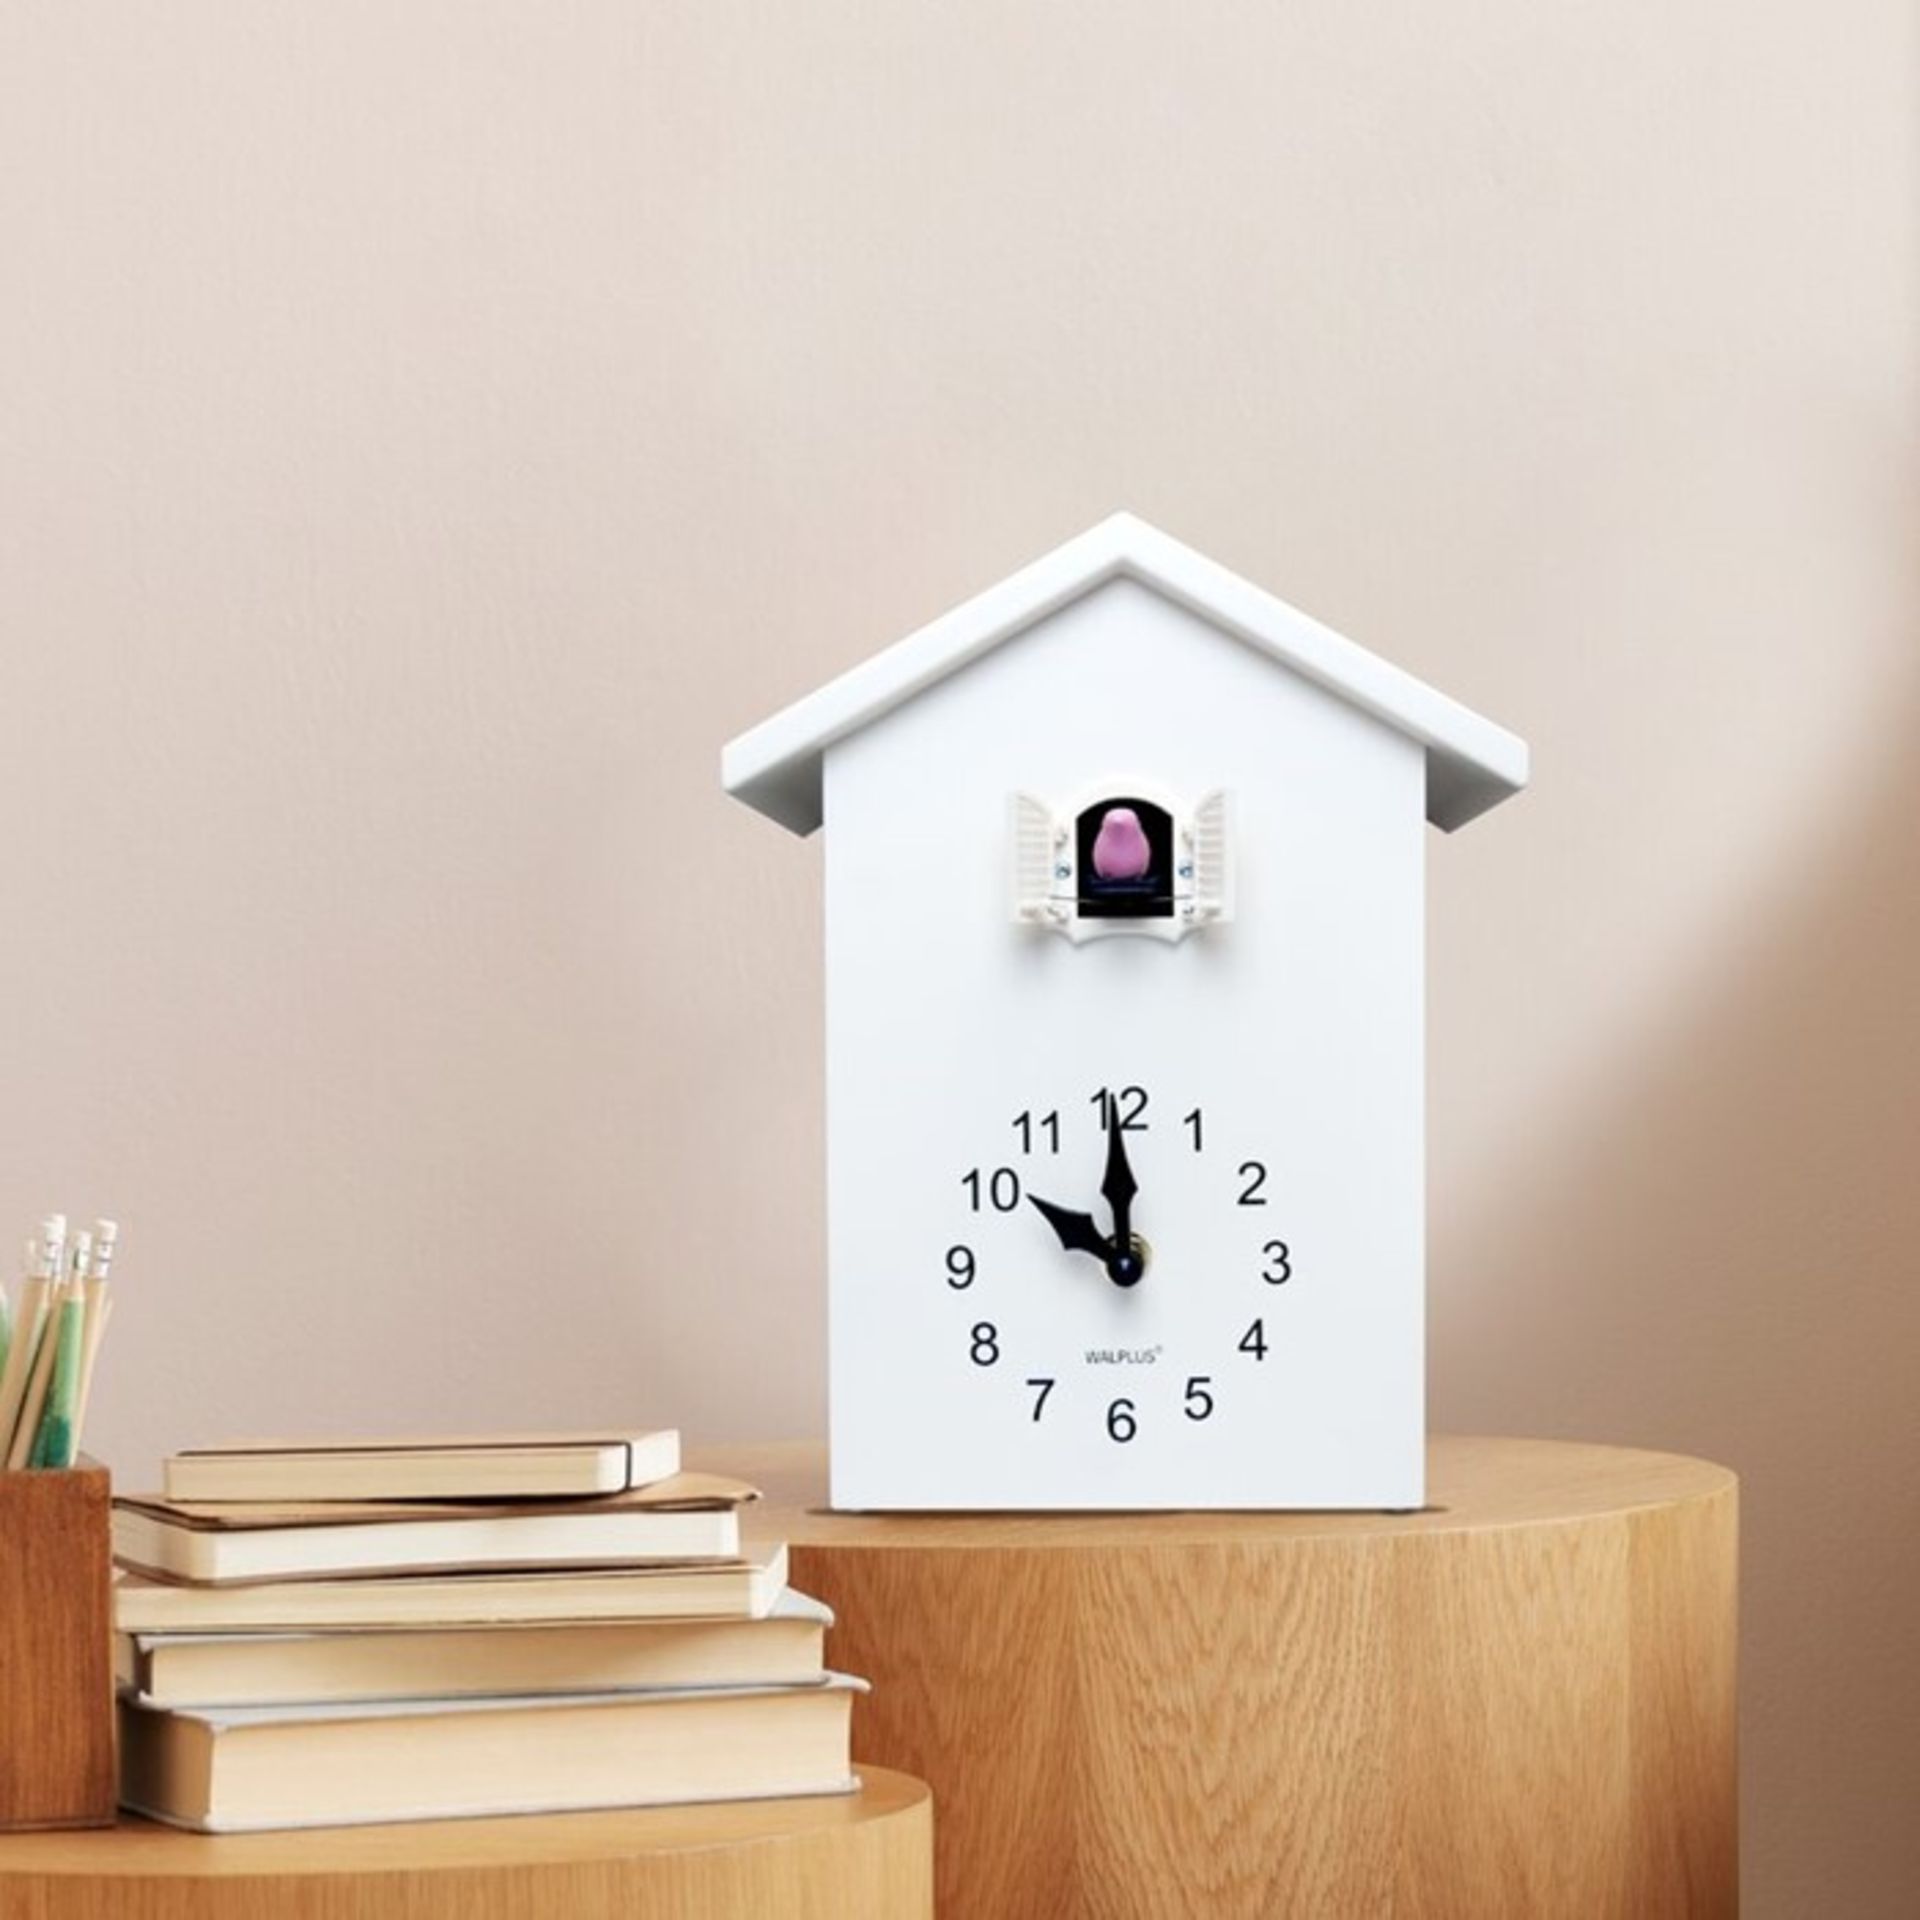 Isabelline, Isabelline Cuckoo Tabletop Clock (WHITE) - RRP £33.82 (XDNL1193 - 17601/28) 3I